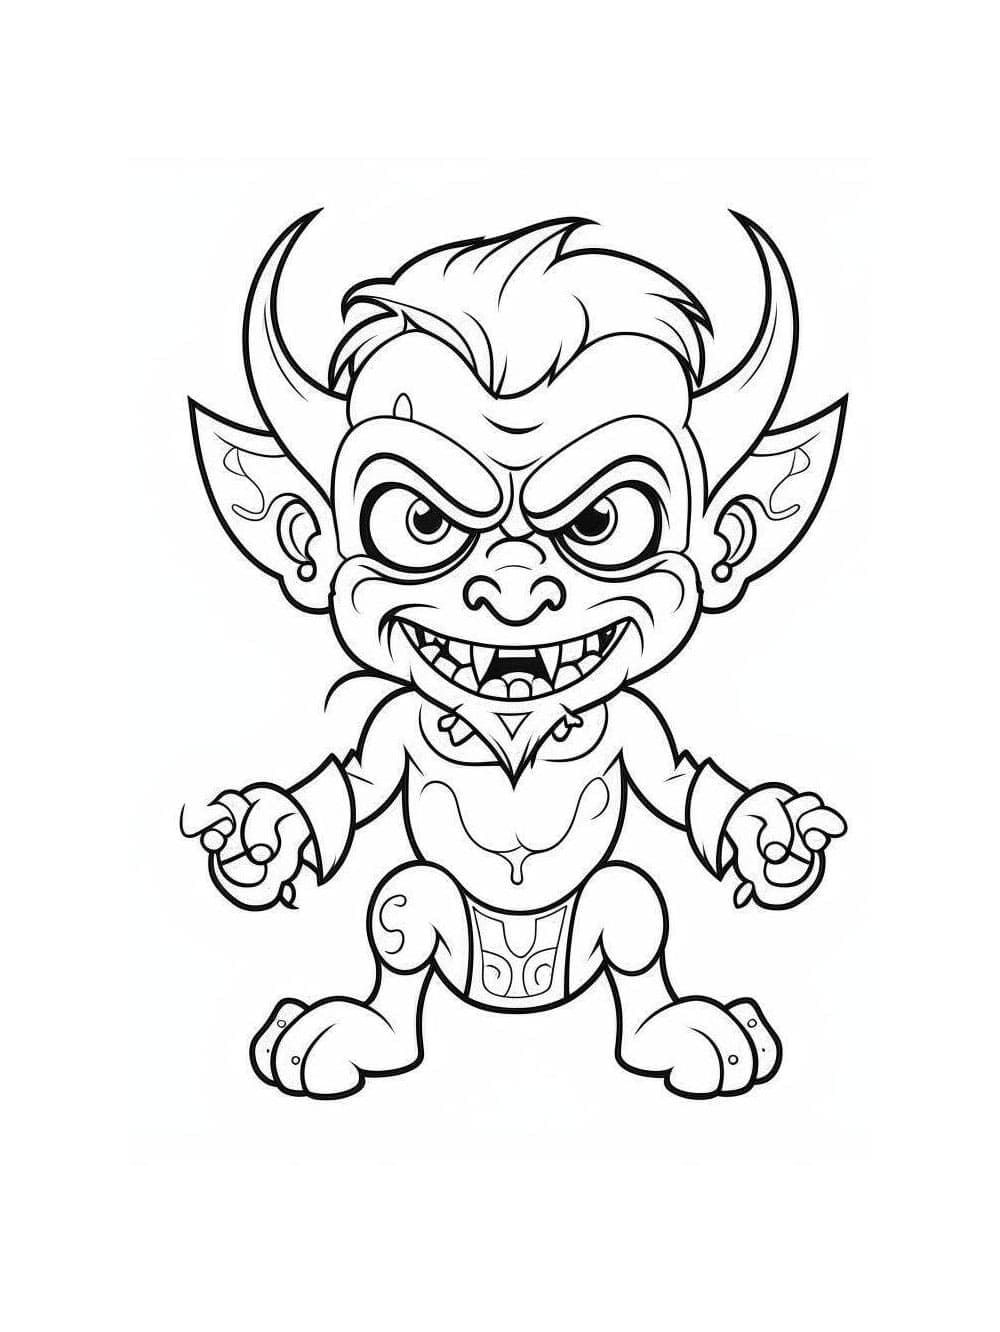 Diable 4 coloring page